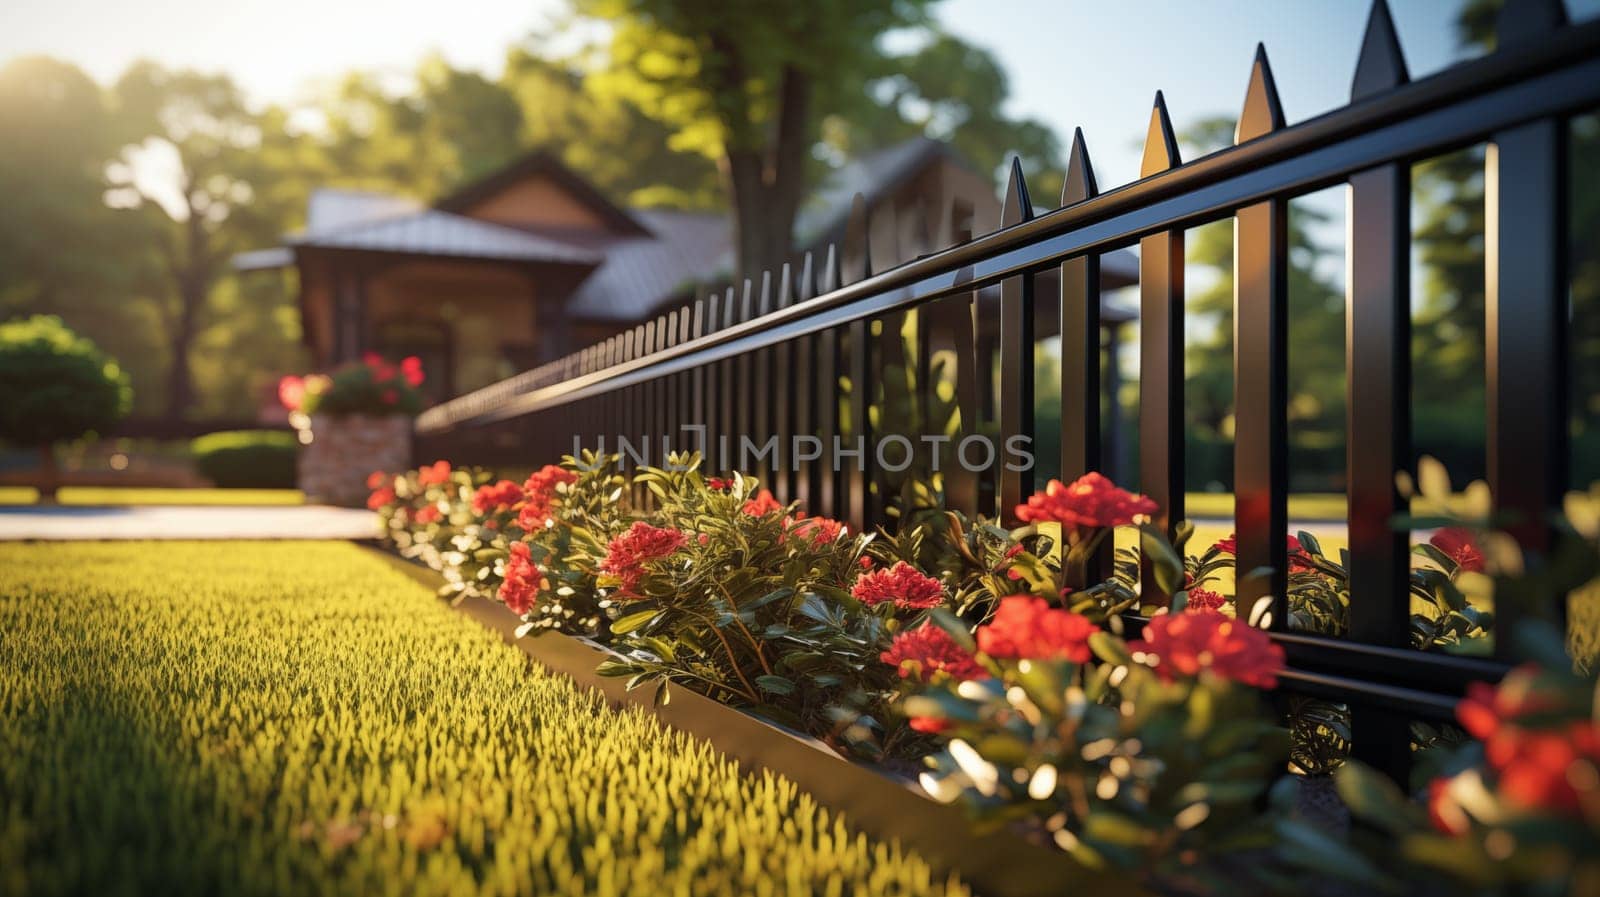 Sunlight filters through a black wrought iron fence onto a vibrant garden of red flowers by Zakharova